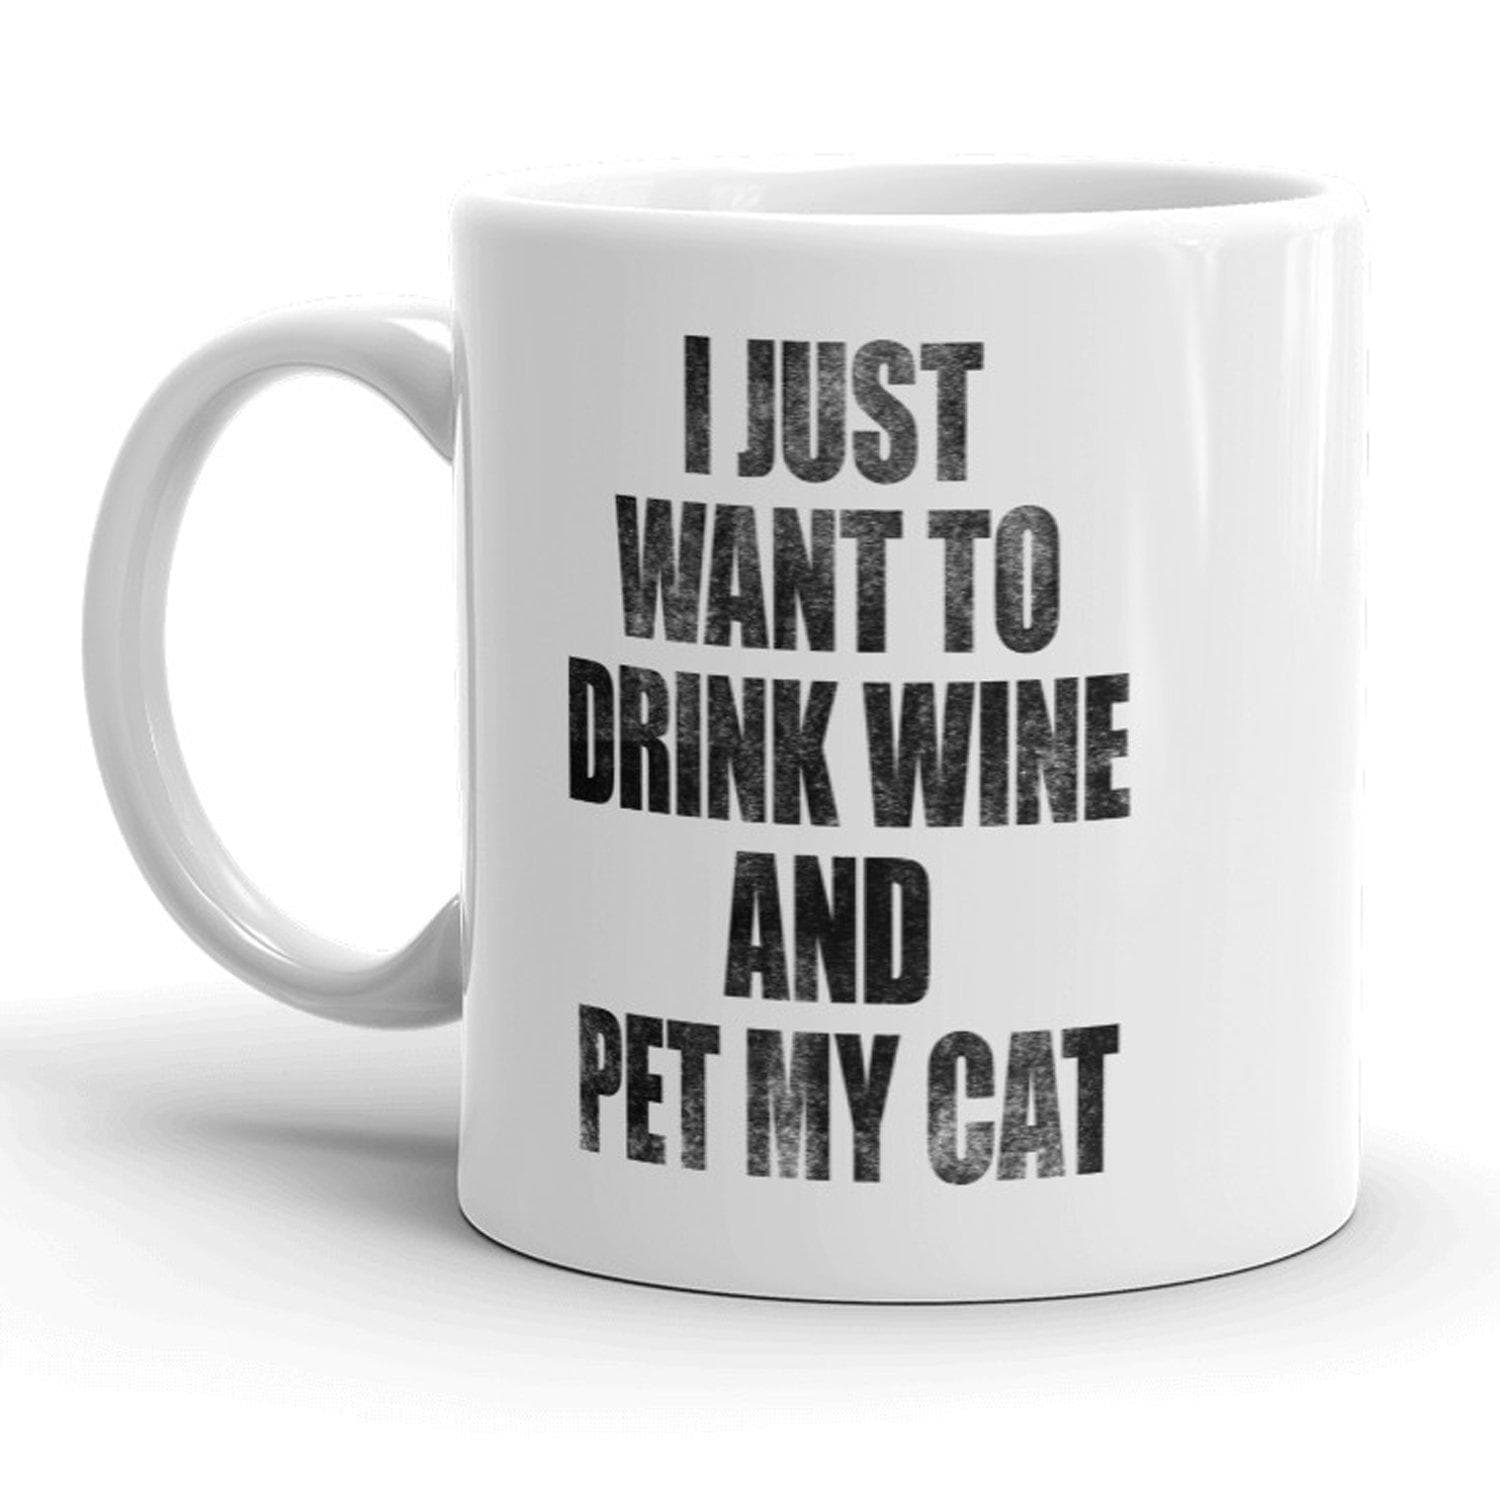 I Just Want To Drink Wine And Pet My Cat Mug - Crazy Dog T-Shirts